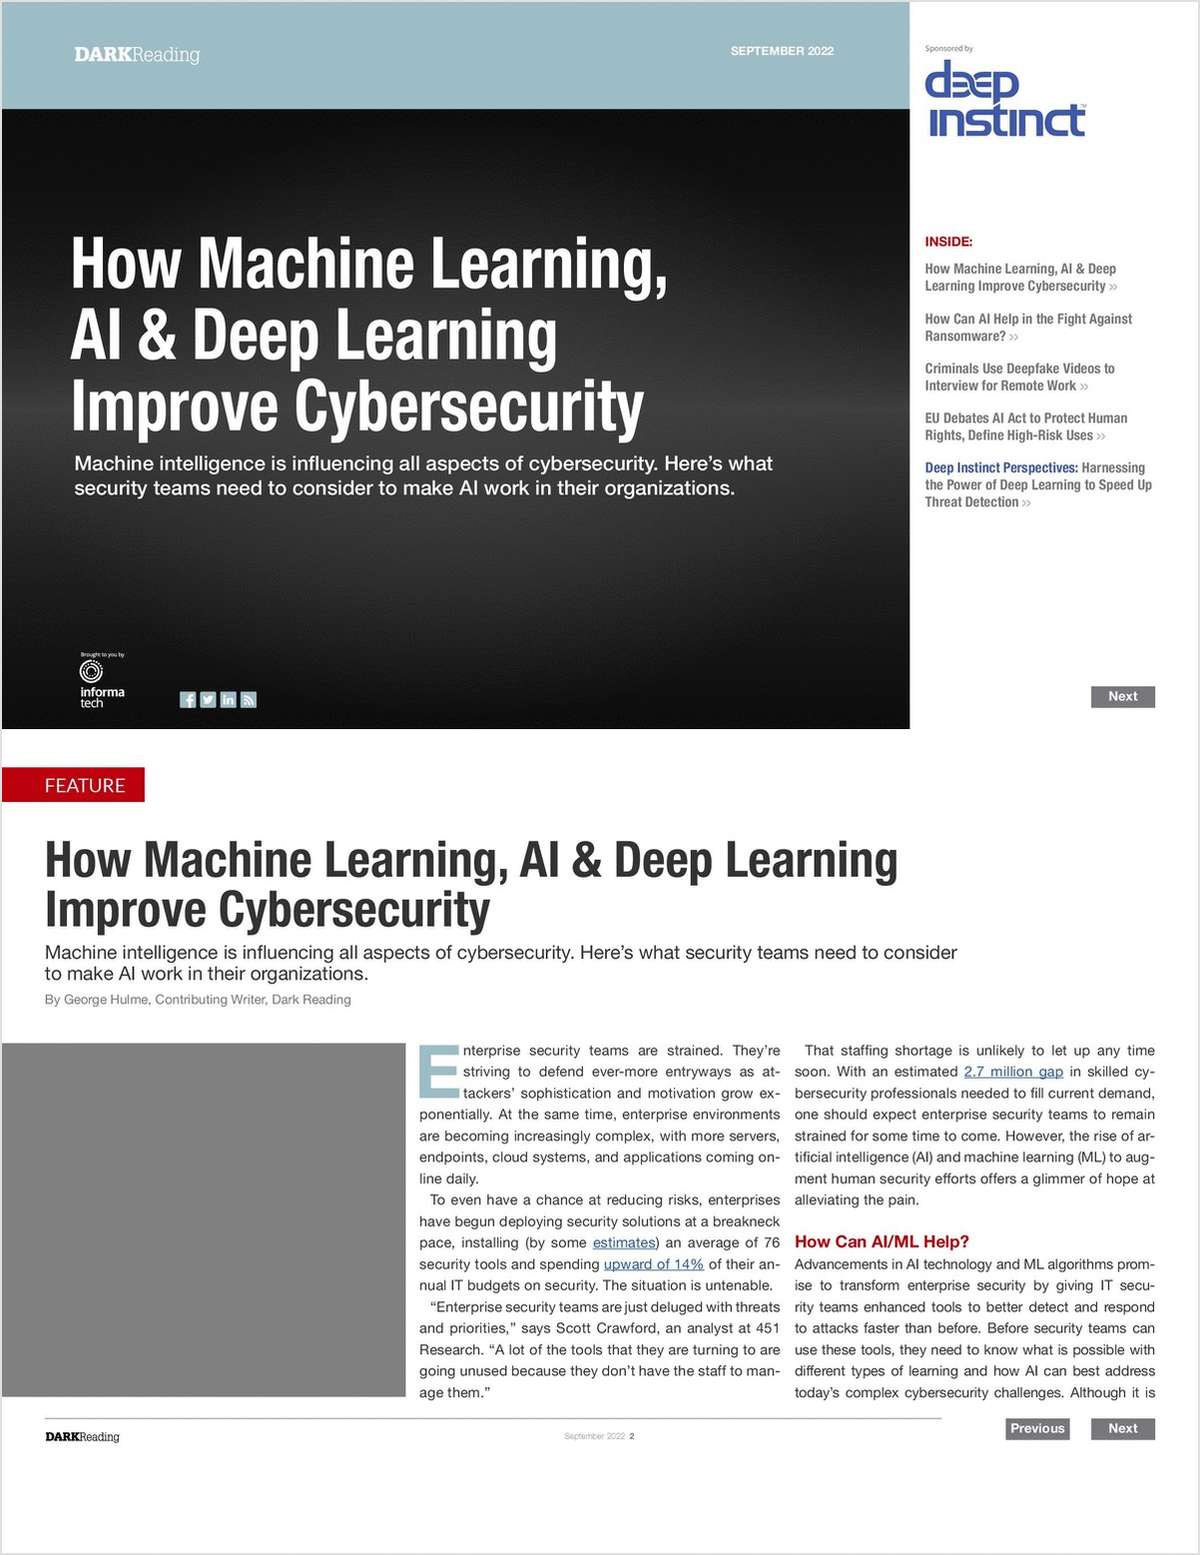 How Machine Learning, AI & Deep Learning Improve Cybersecurity